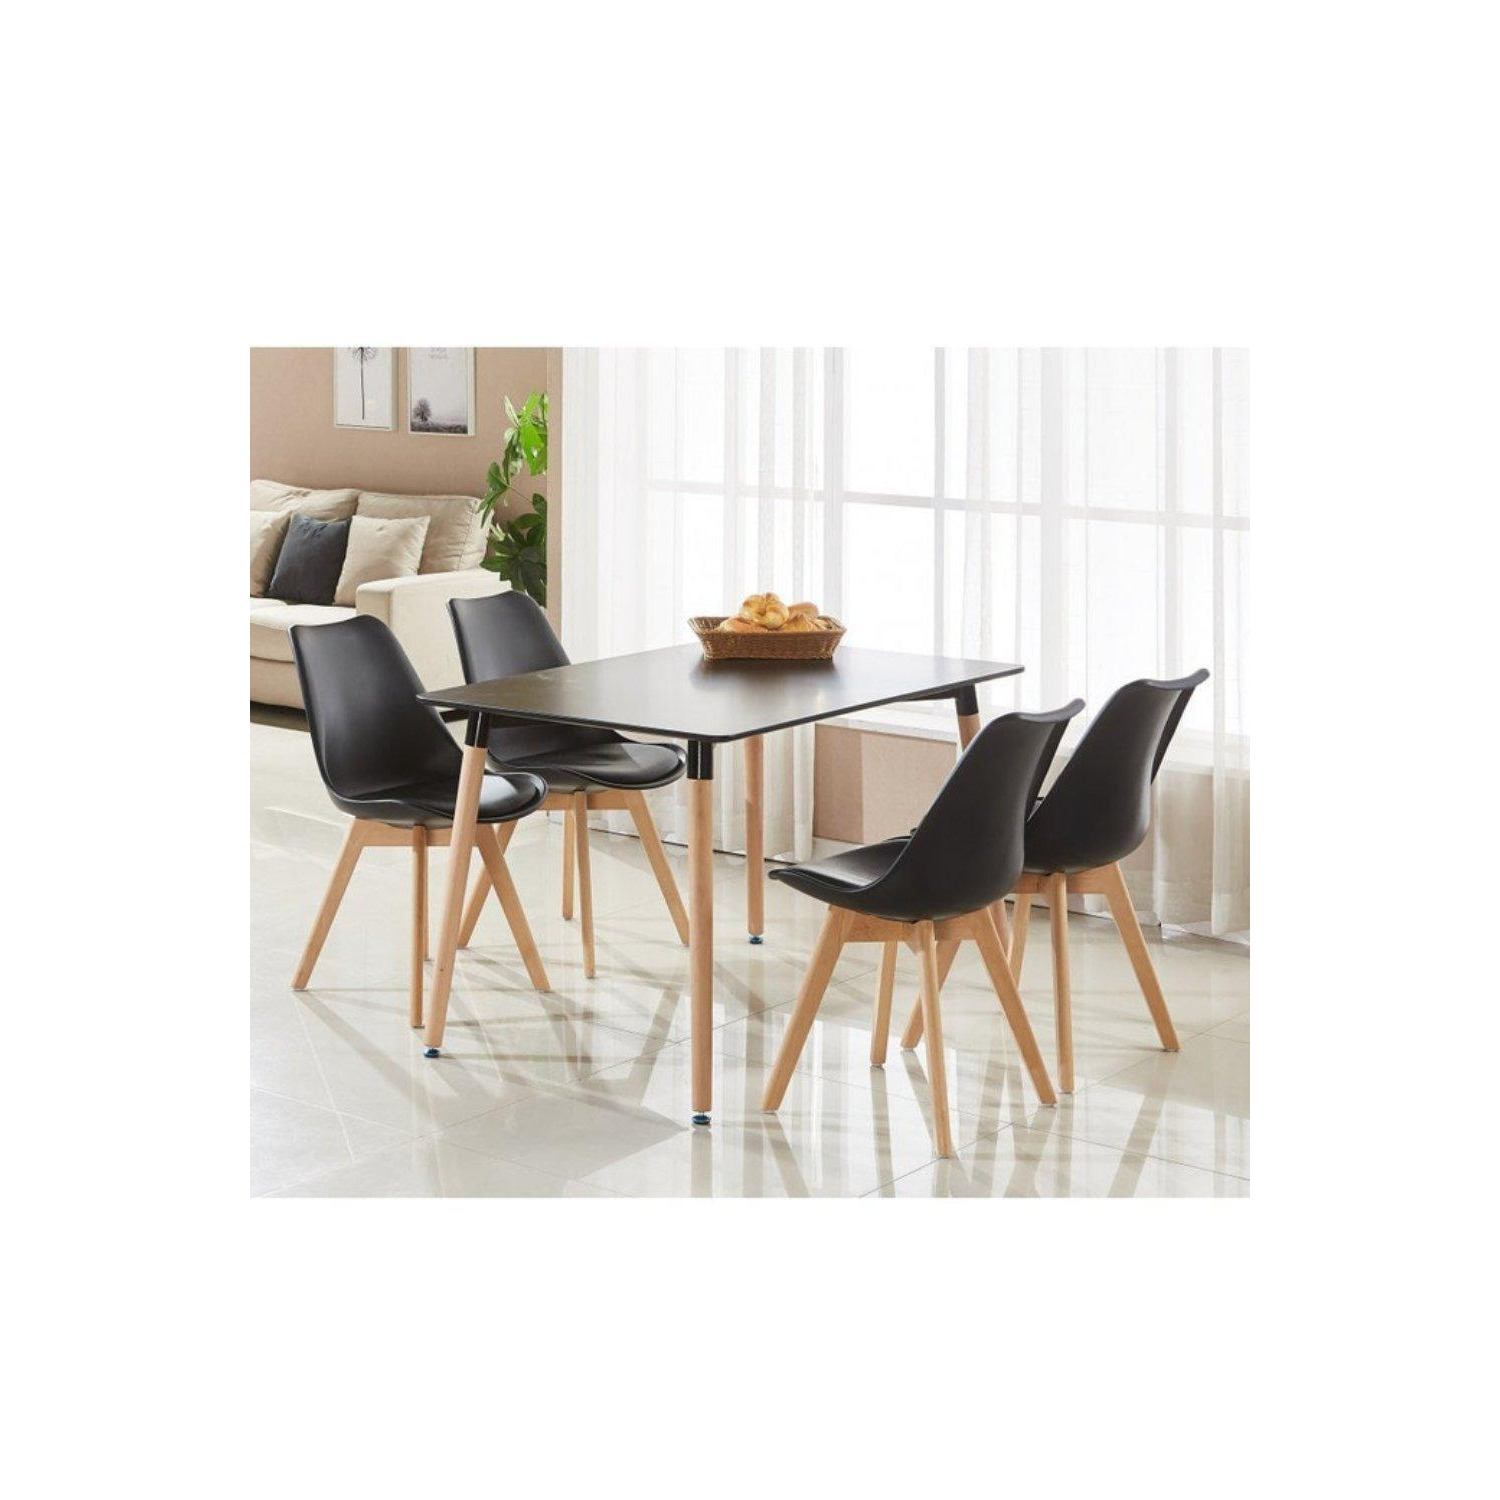 5PCs Dining Set - a Halo Dining Table & Set of 4 Lorenzo Tulip chairs with Padded Seat - image 1